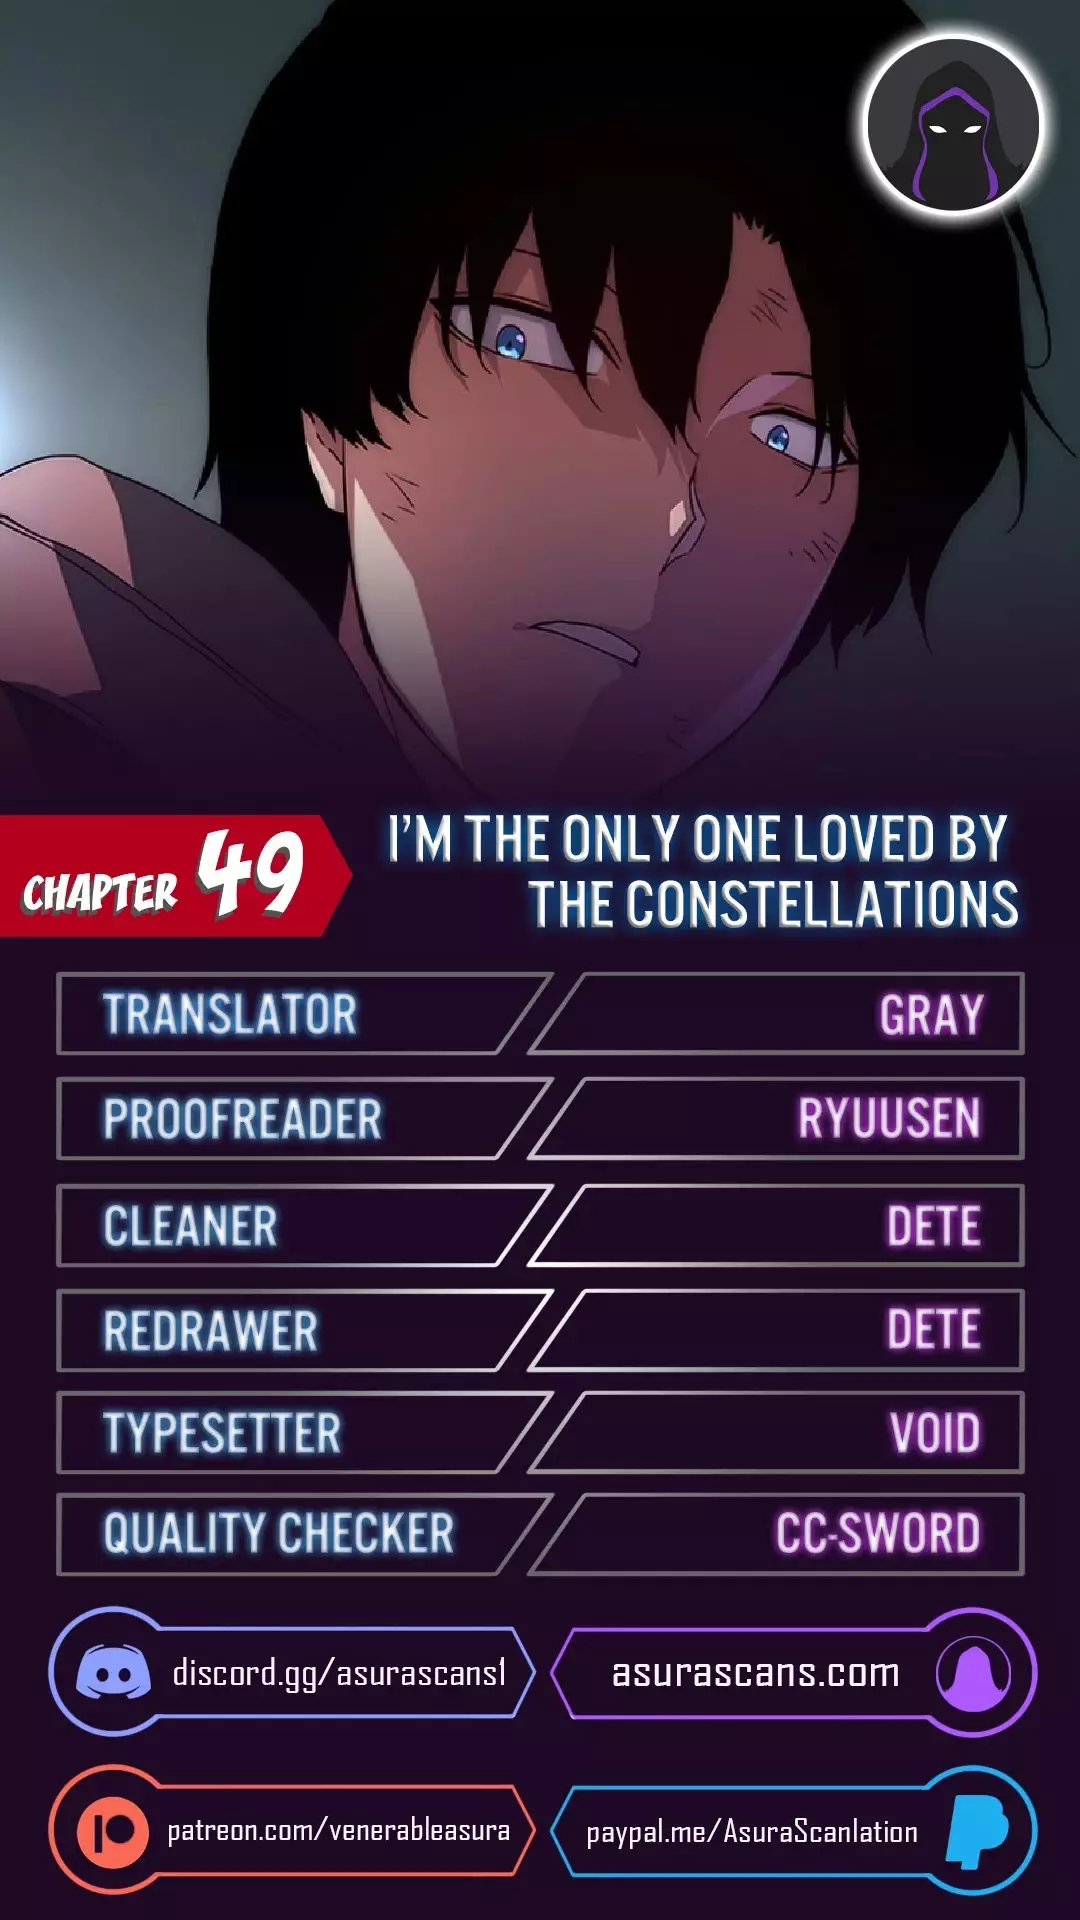 I'm The Only One Loved By The Constellations! - 49 page 1-692aa786